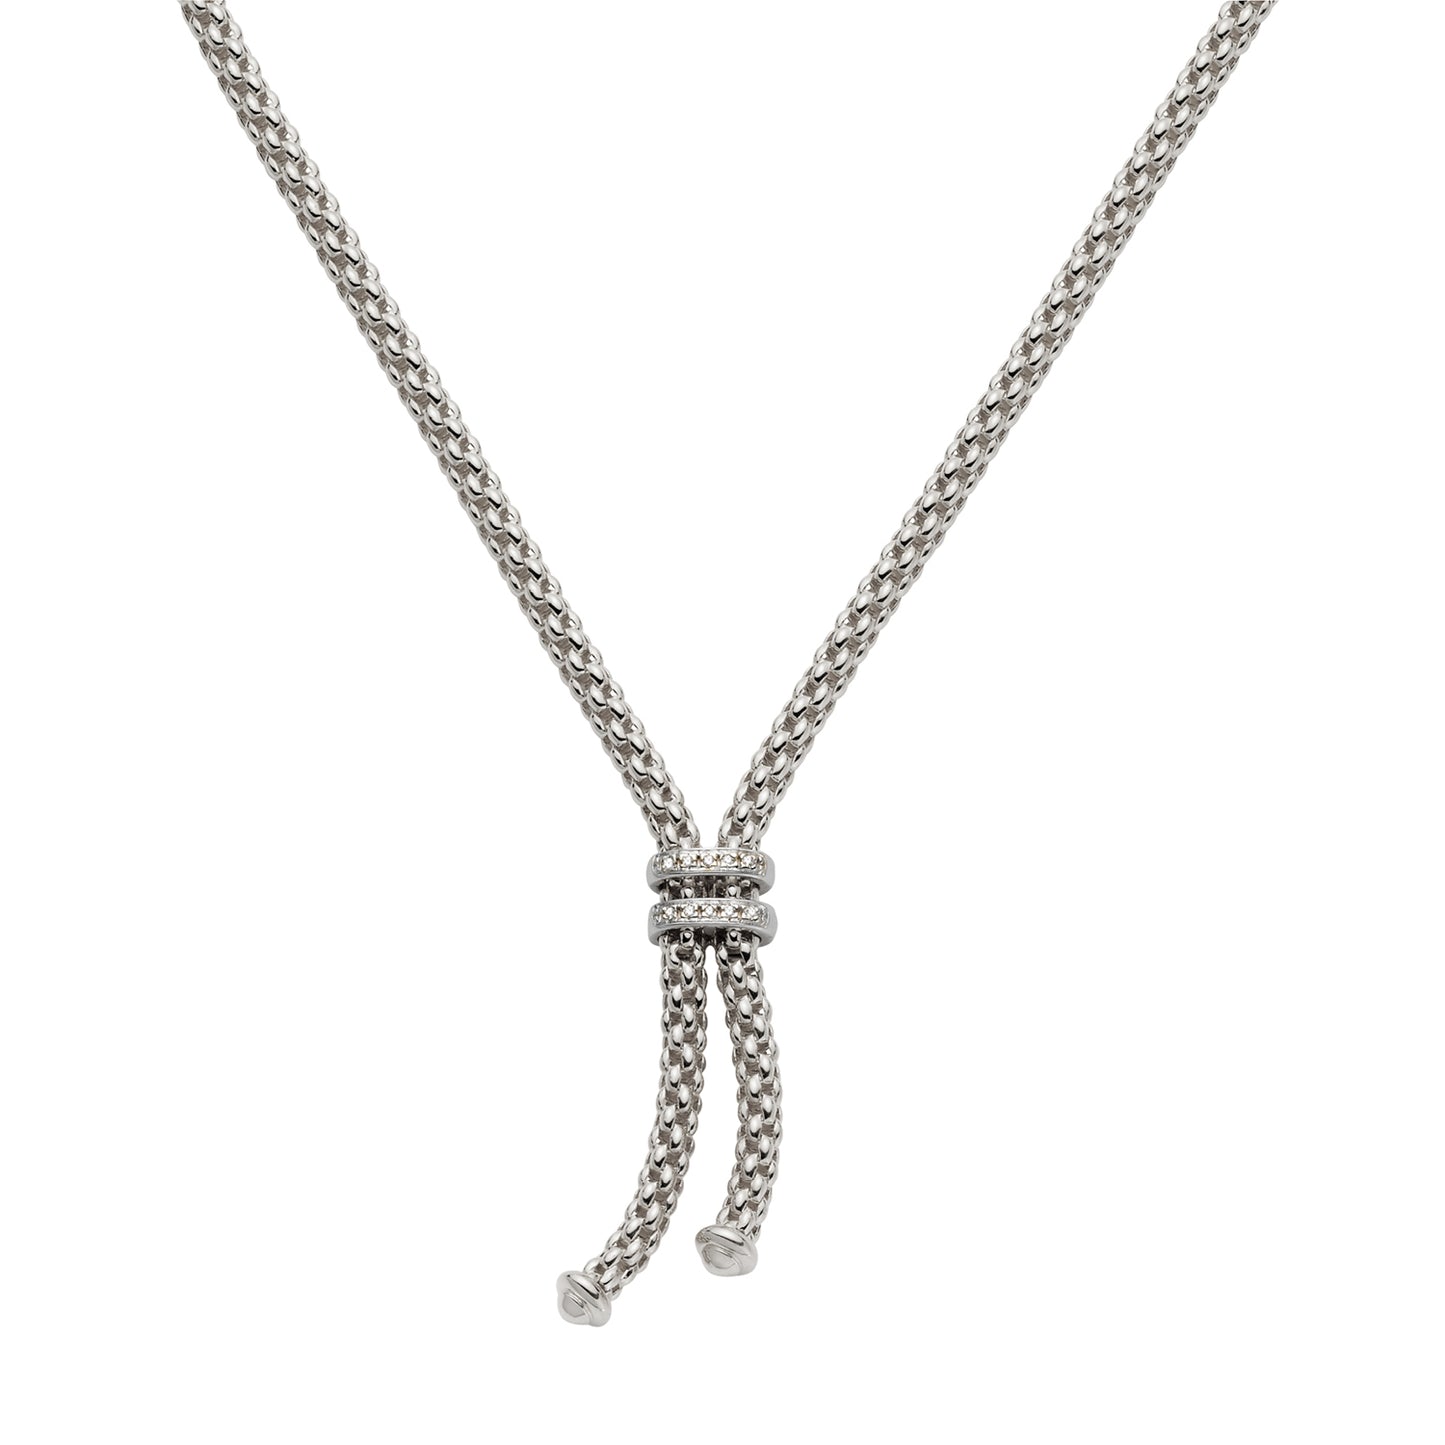 Fope Women's Necklace White Gold 809 BBR